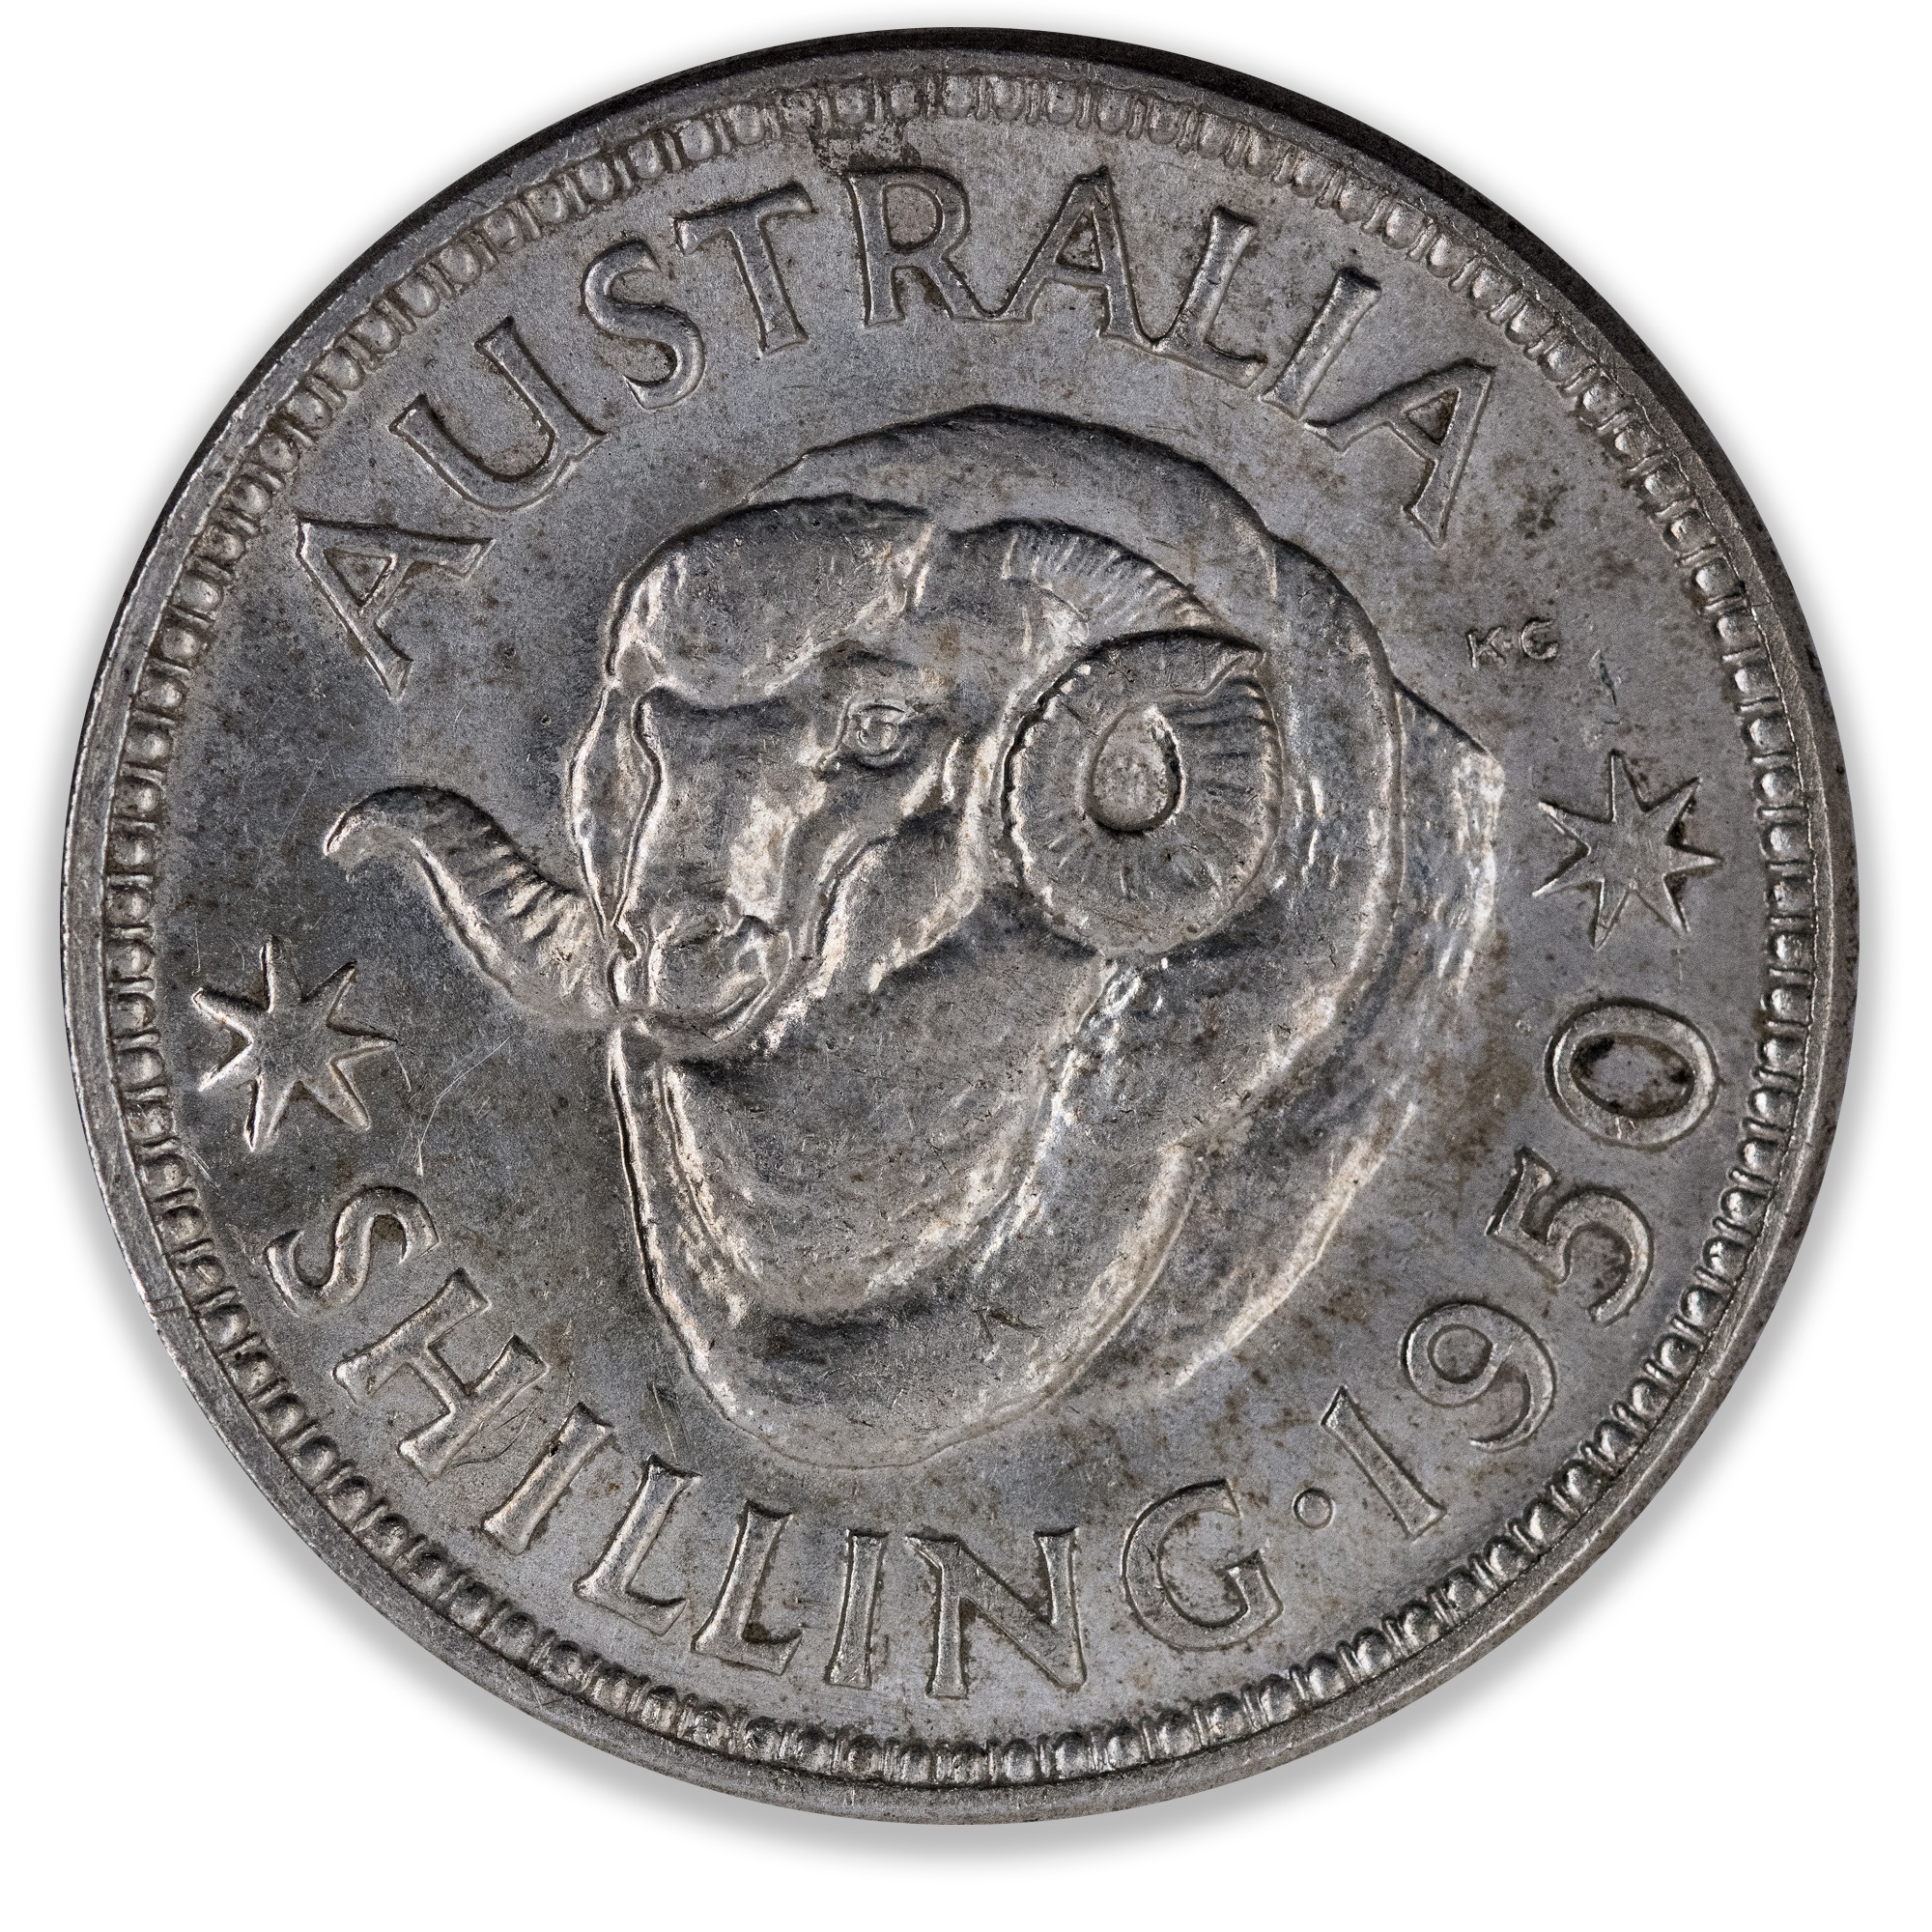 1950 Australian Shilling About Uncirculated/Uncirculated